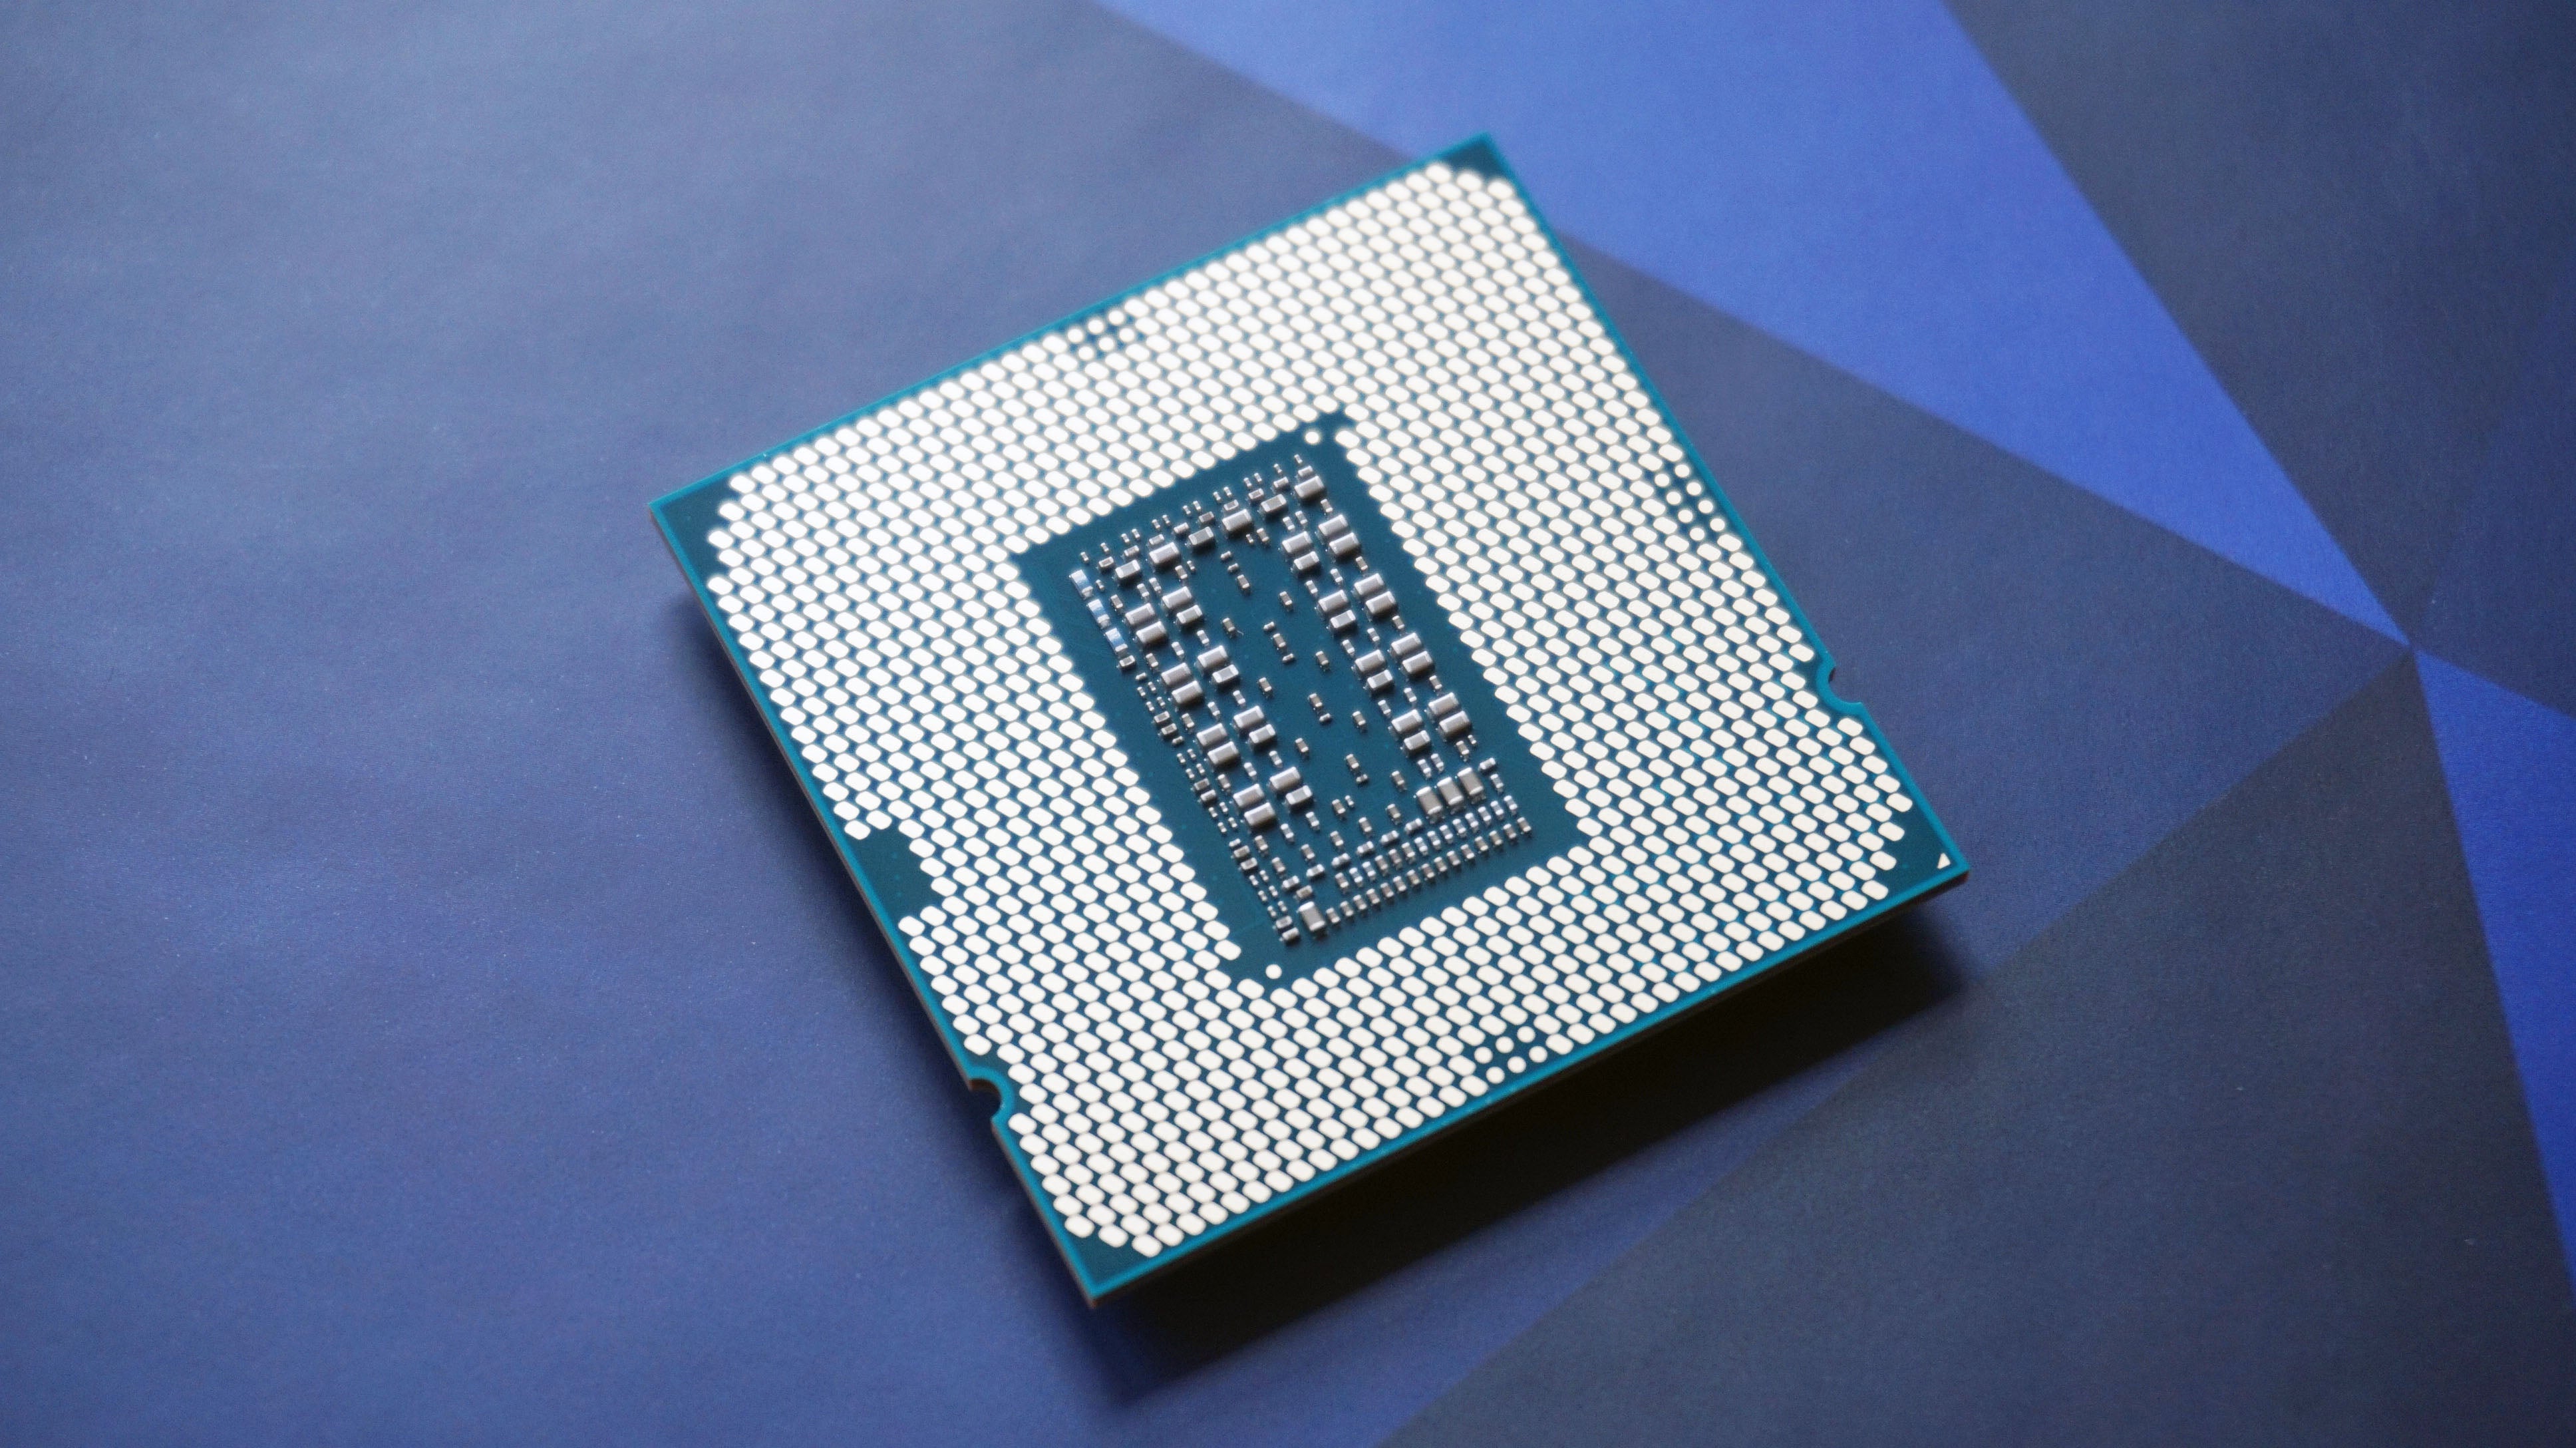 Intel's Core i9 10850K flagship CPU is down to $290 at Newegg